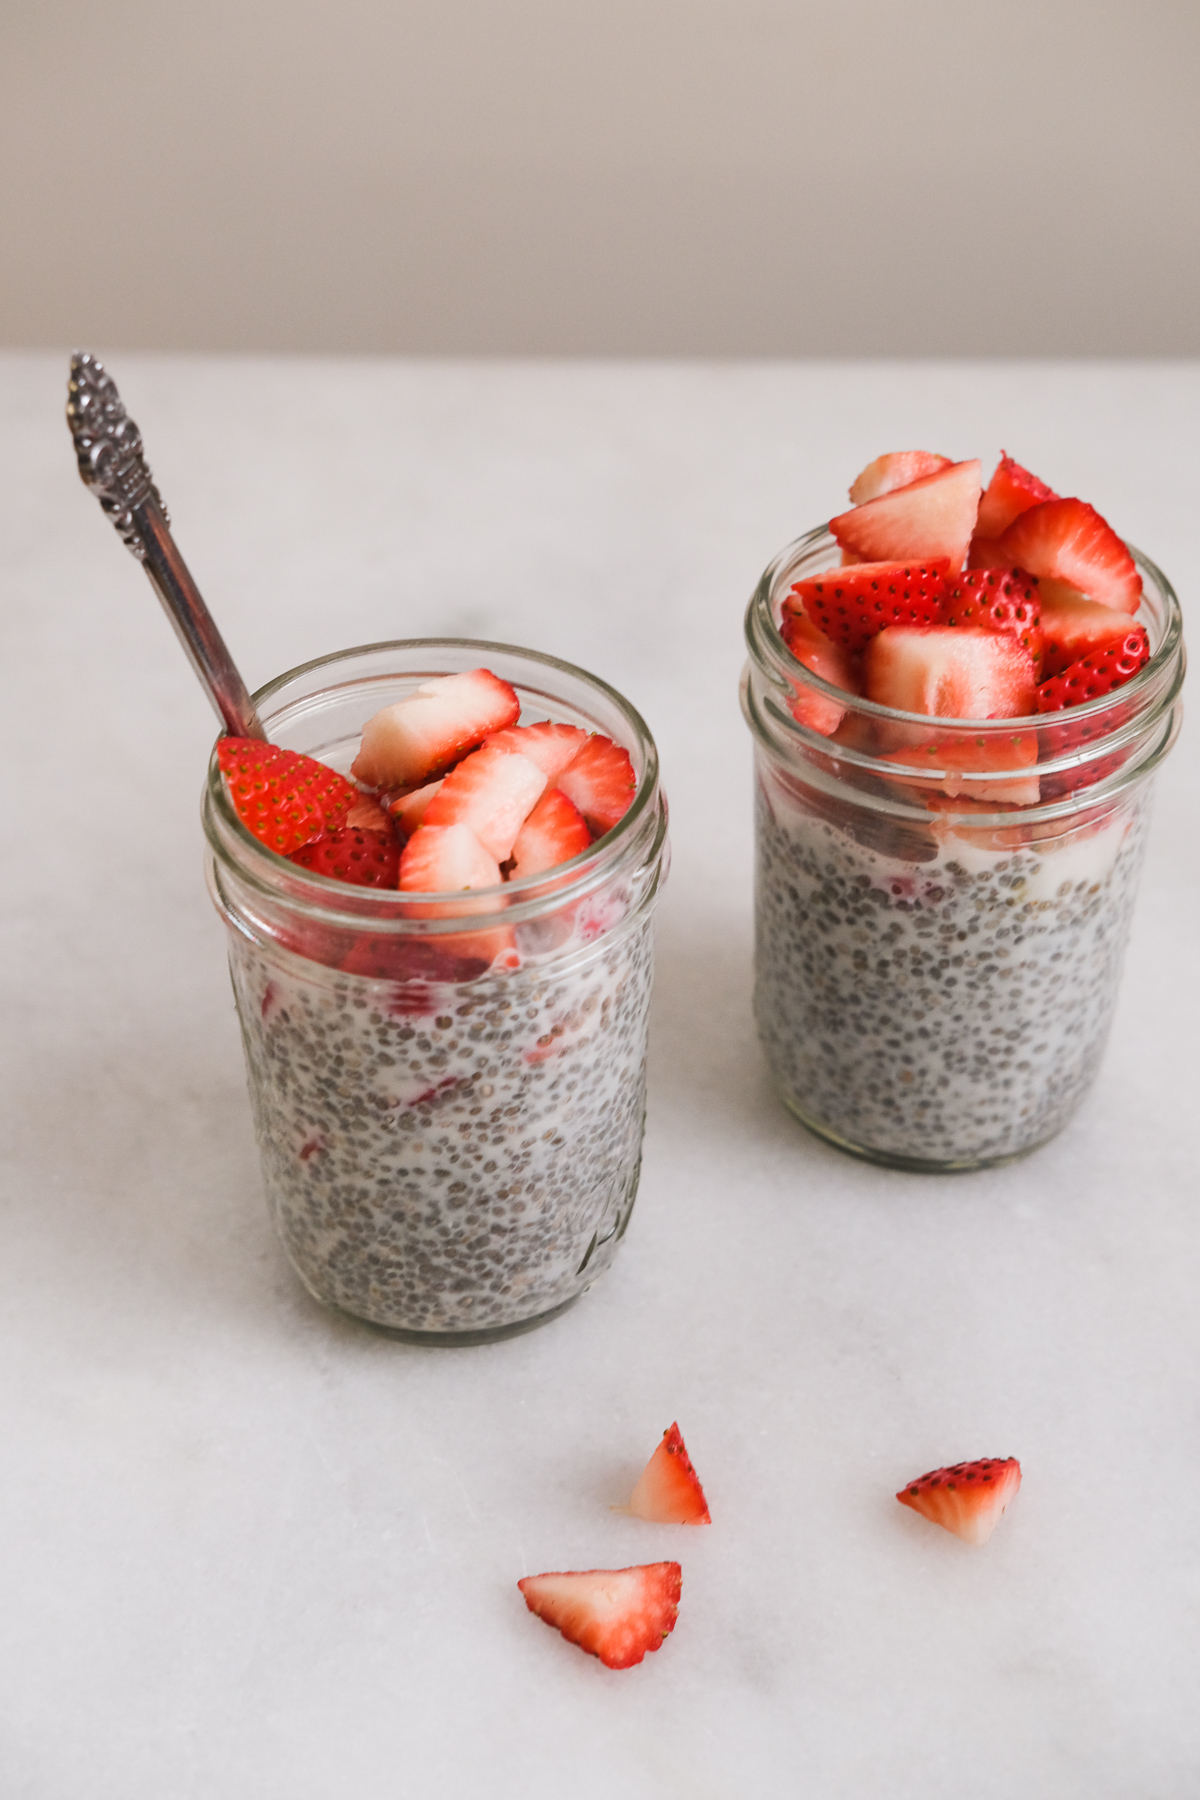 prepping chia seed puddings for the week